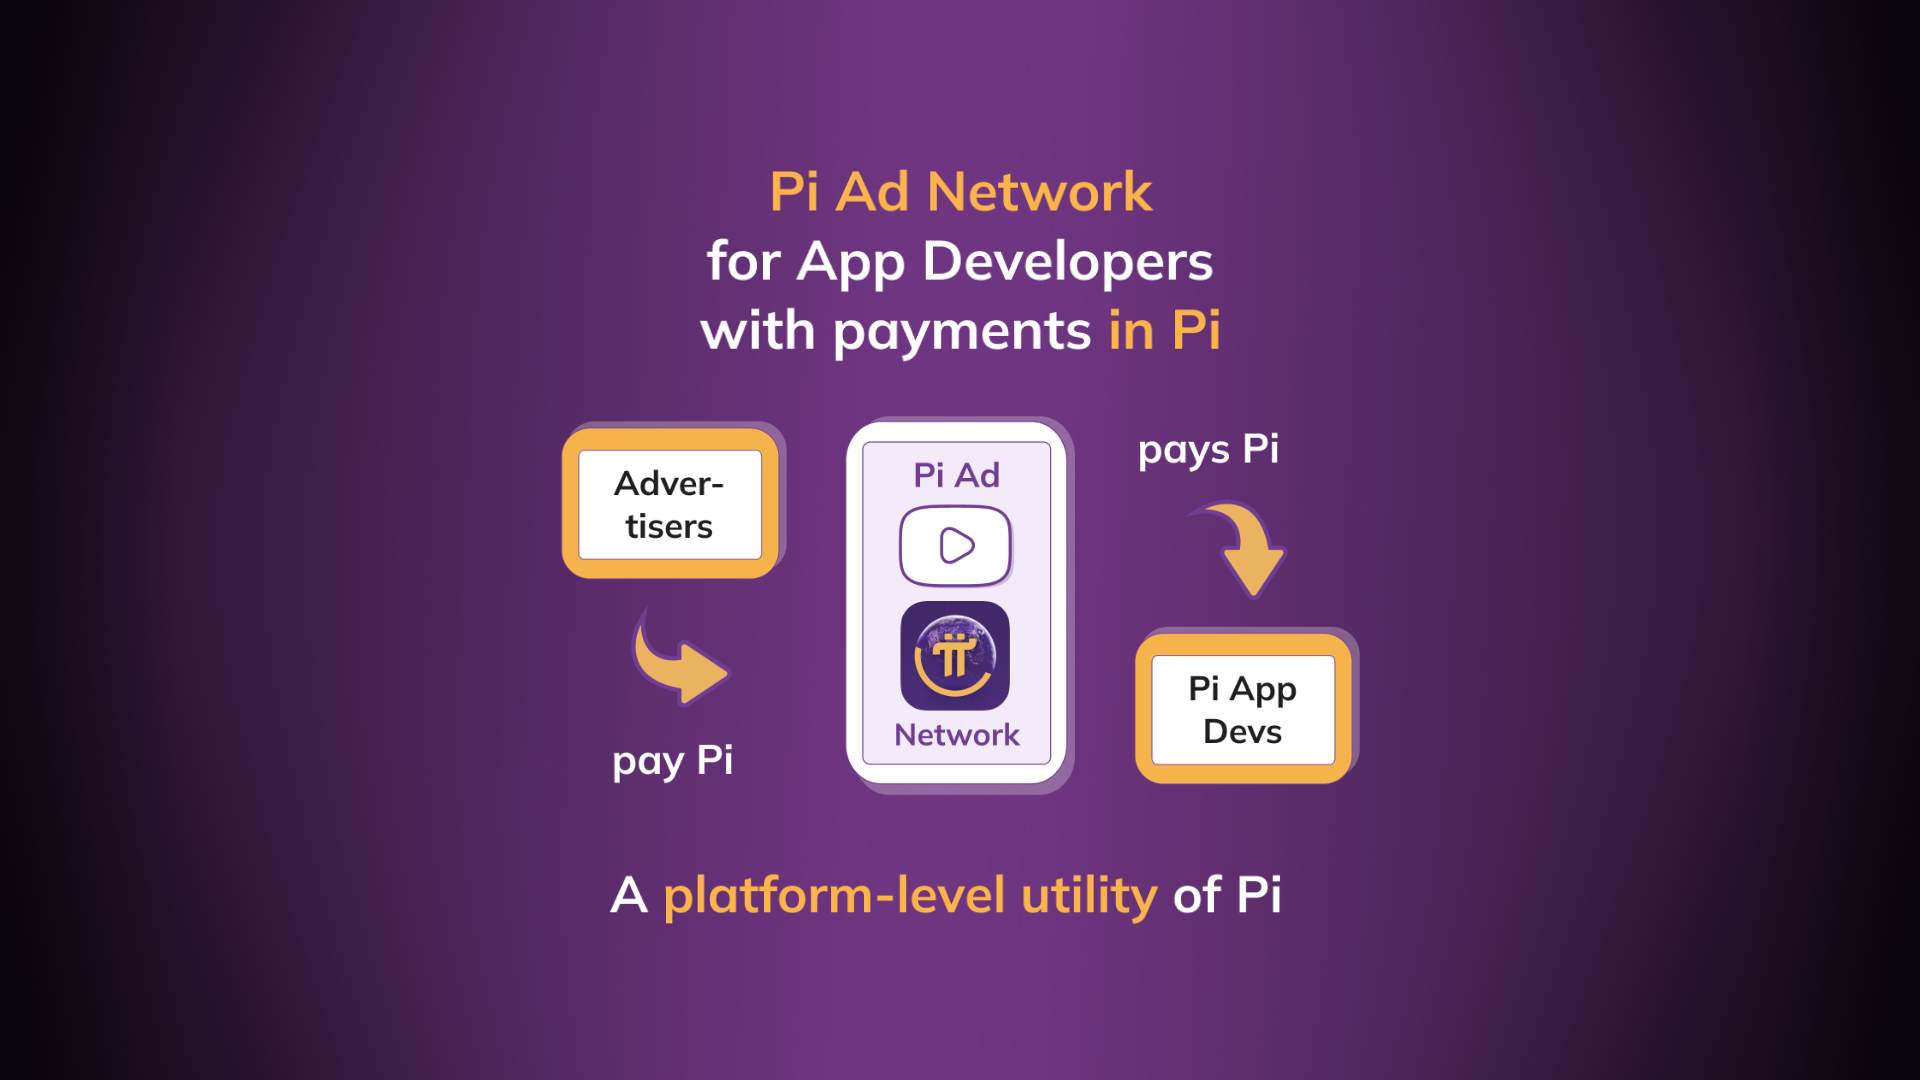 The Pilot Launch of Pi Ad Network